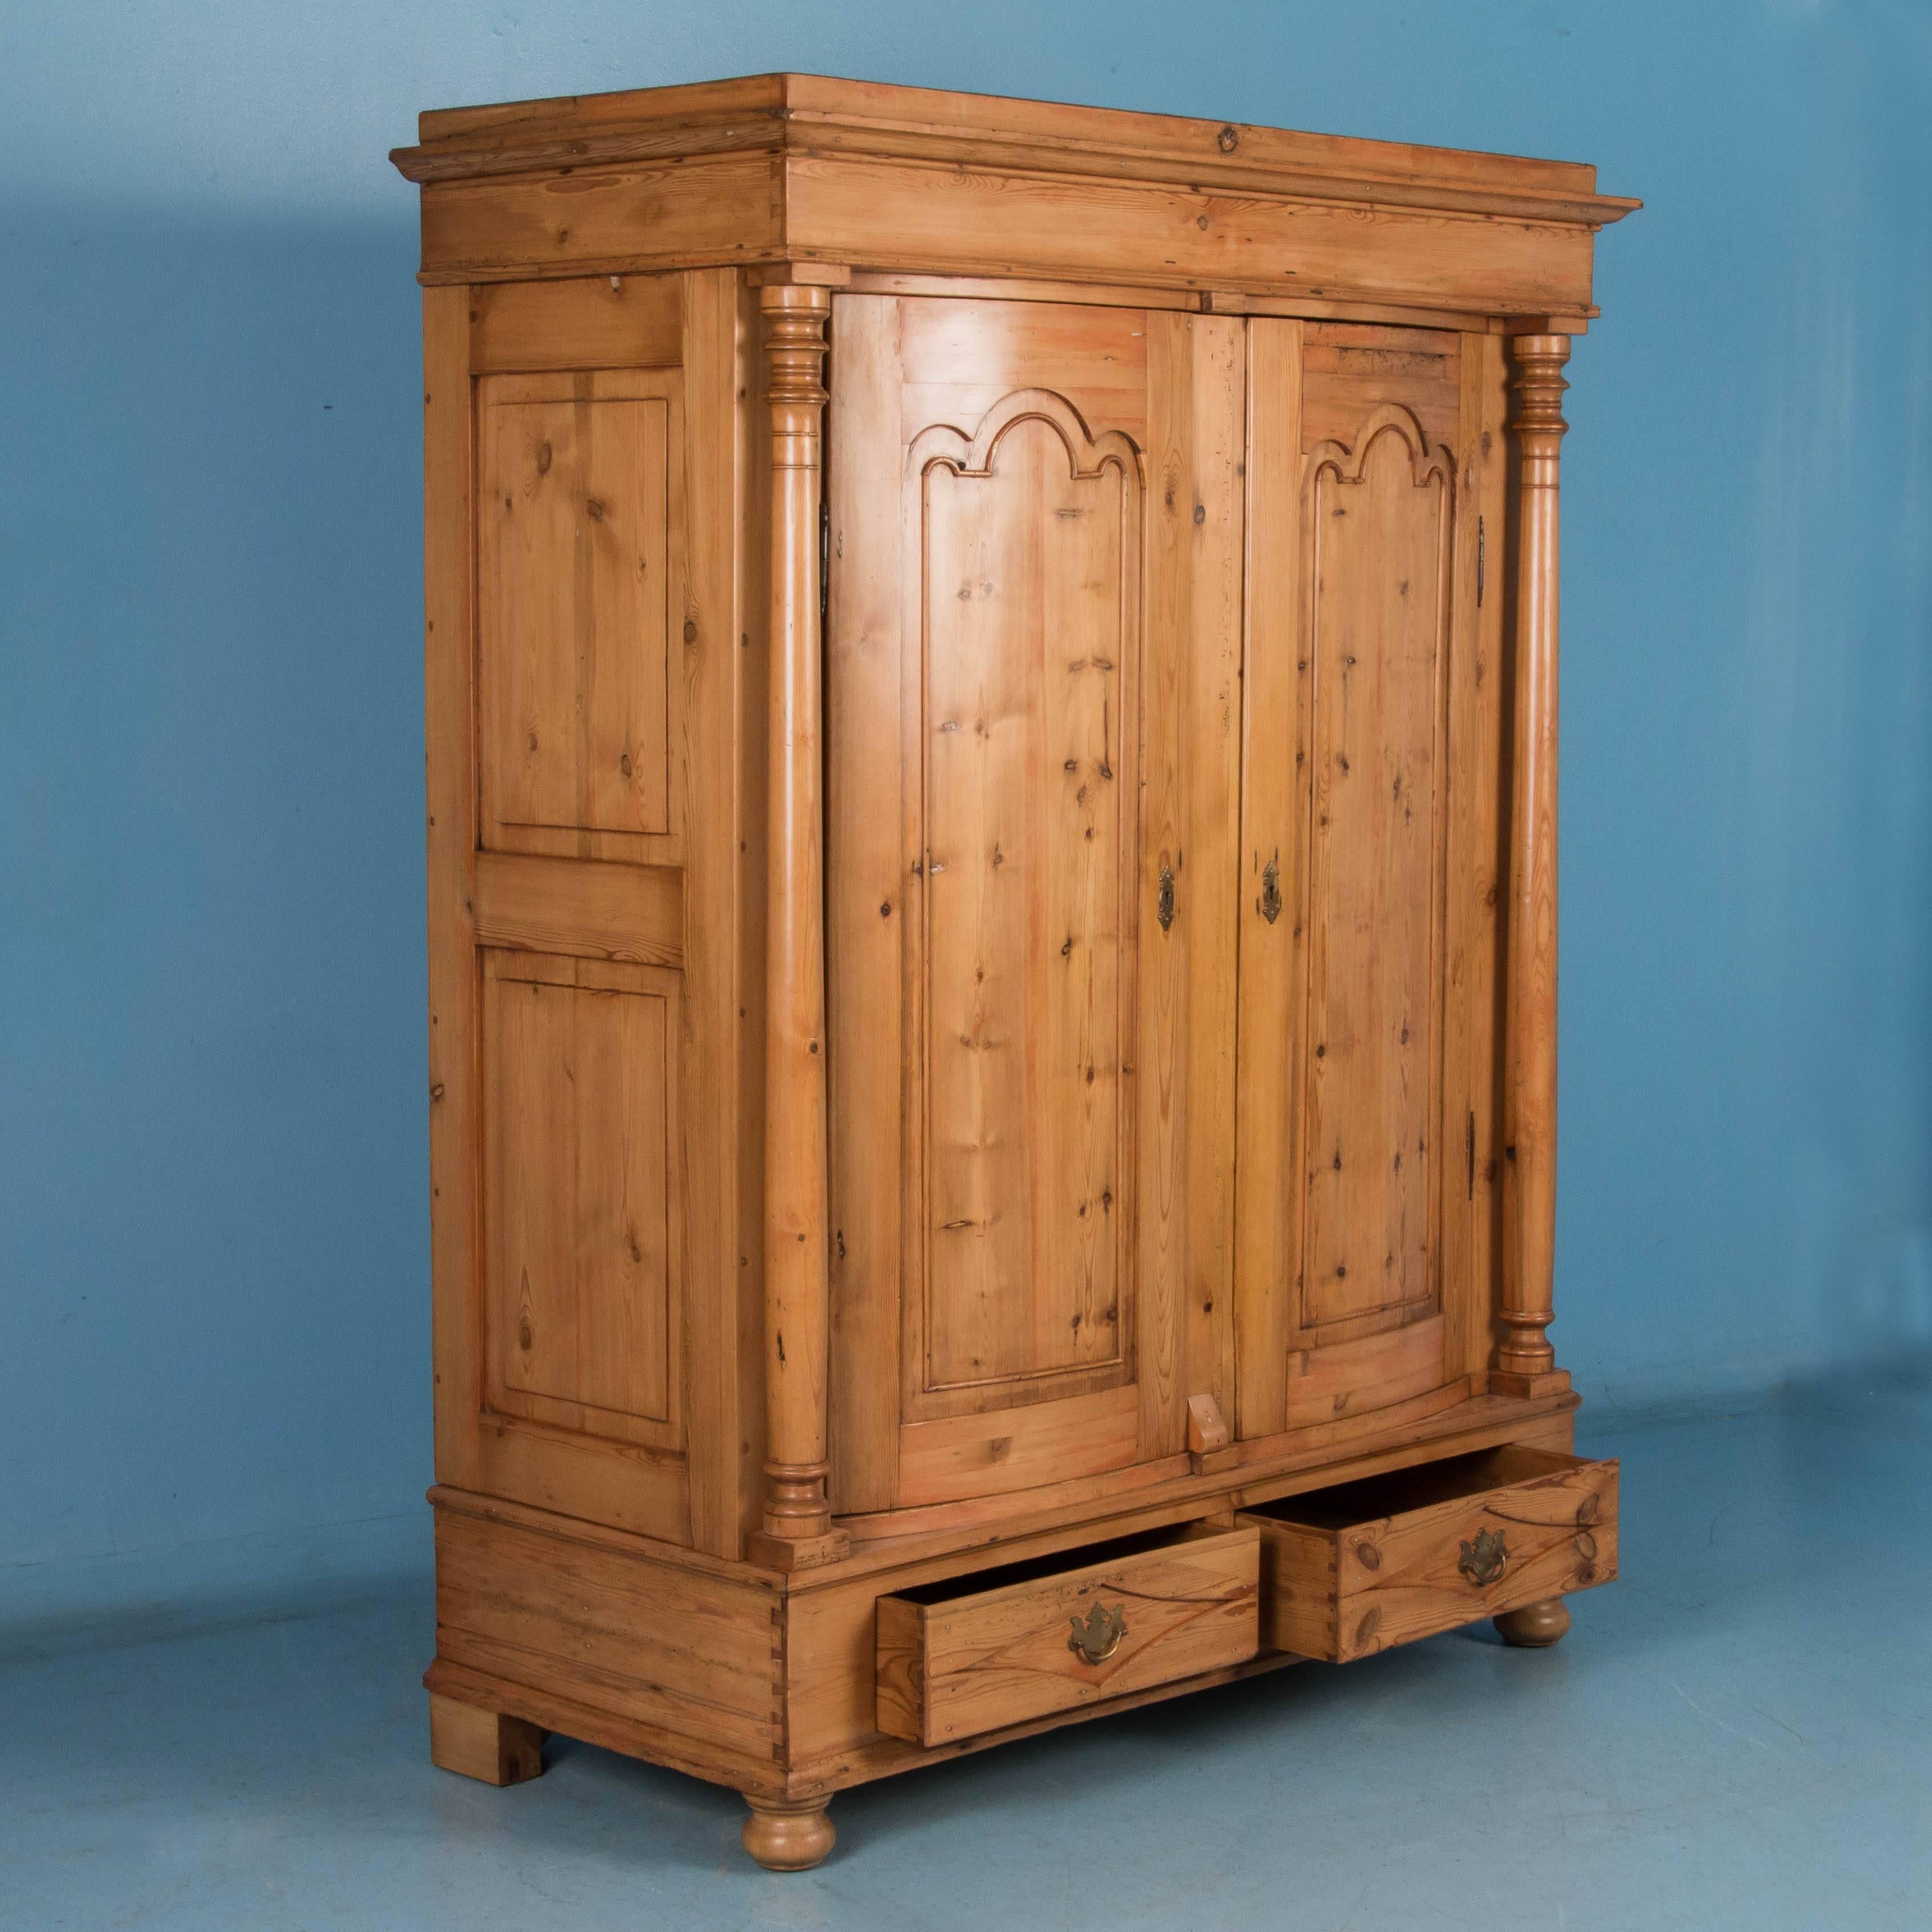 The striking beauty of this large country pine armoire is due to the graceful lines and curves enhanced by the warmth of the natural pine and faint hints of old red paint. Seen from any side, this armoire attracts the eye. This Biedermeier period